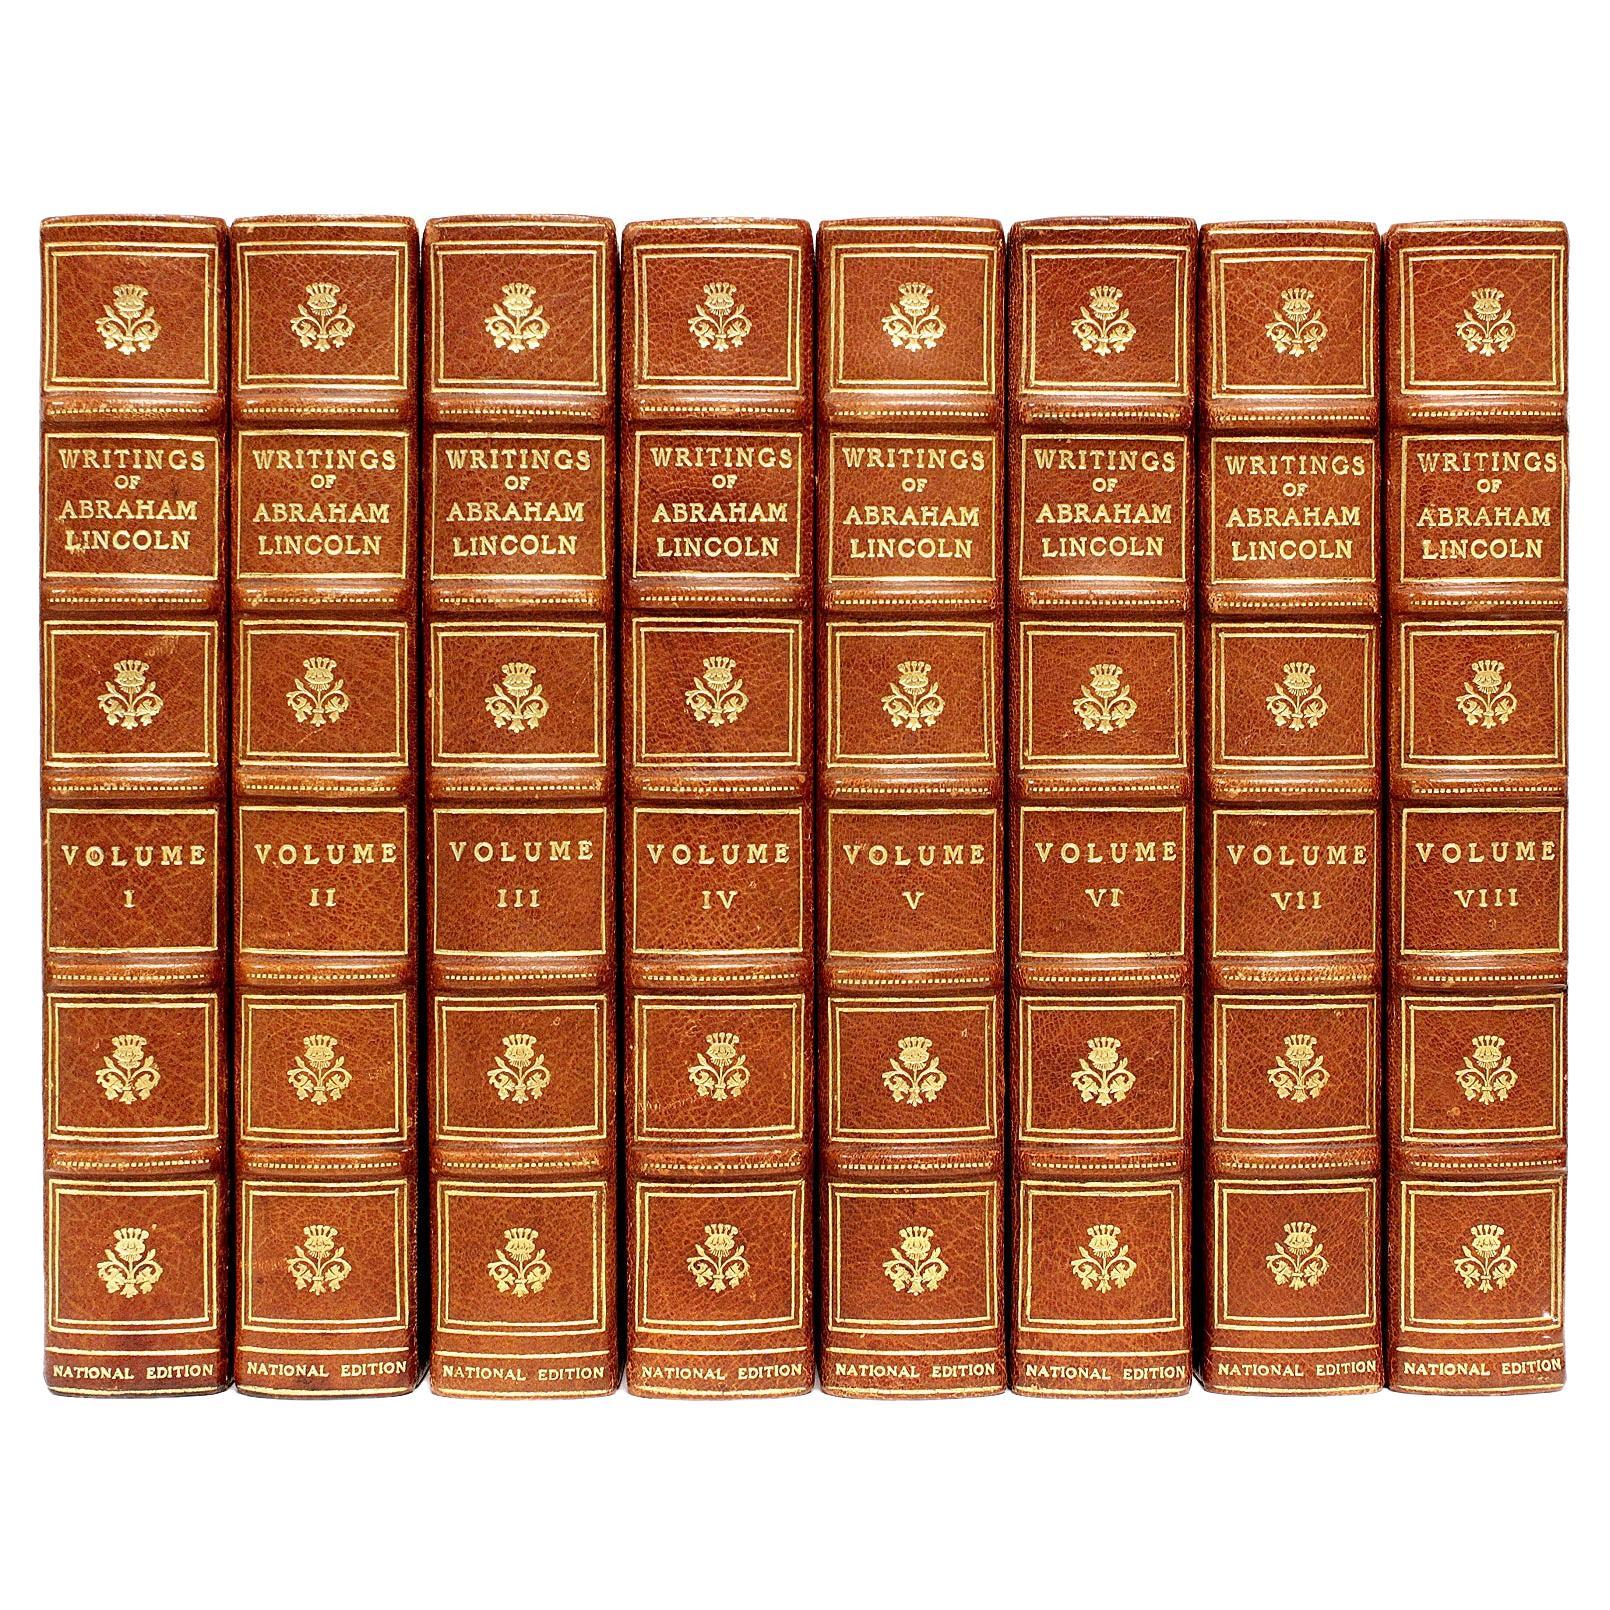 Writings of Abraham Lincoln, 8 Vols National Edition, in a Fine Leather Binding